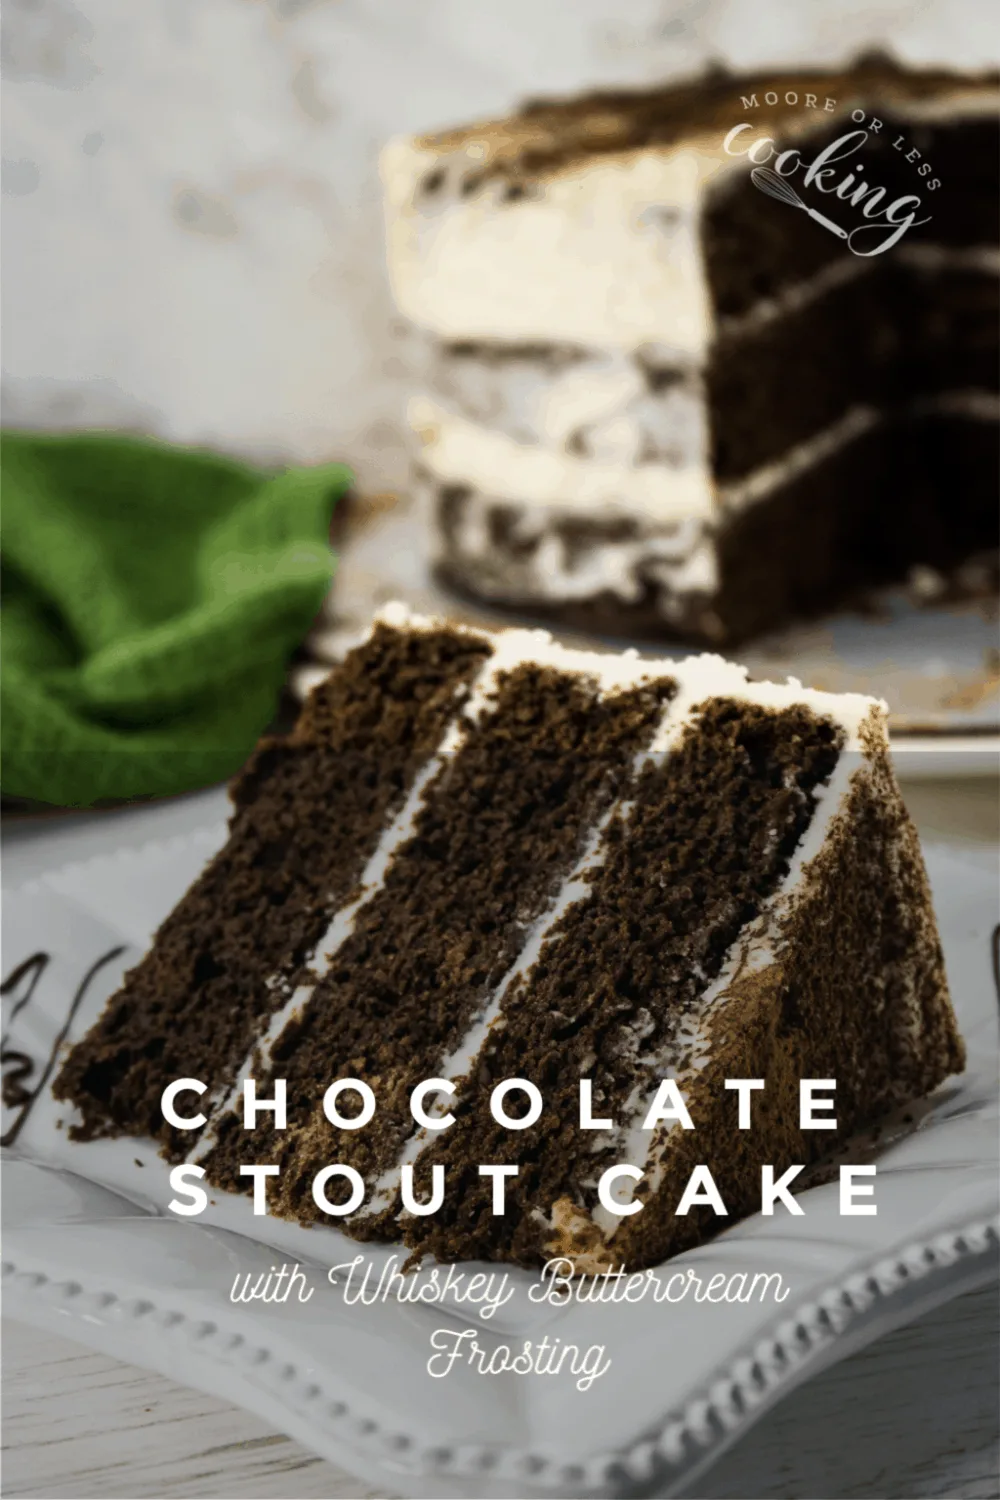 Chocolate Stout Cake with Whiskey Buttercream Frosting. An incredibly decadent dessert for St. Patrick's Day or any day. #chocolatecake #cake #dessert #mooreorlesscooking #chocolatestoutcake #pretty #delicious via @Mooreorlesscook